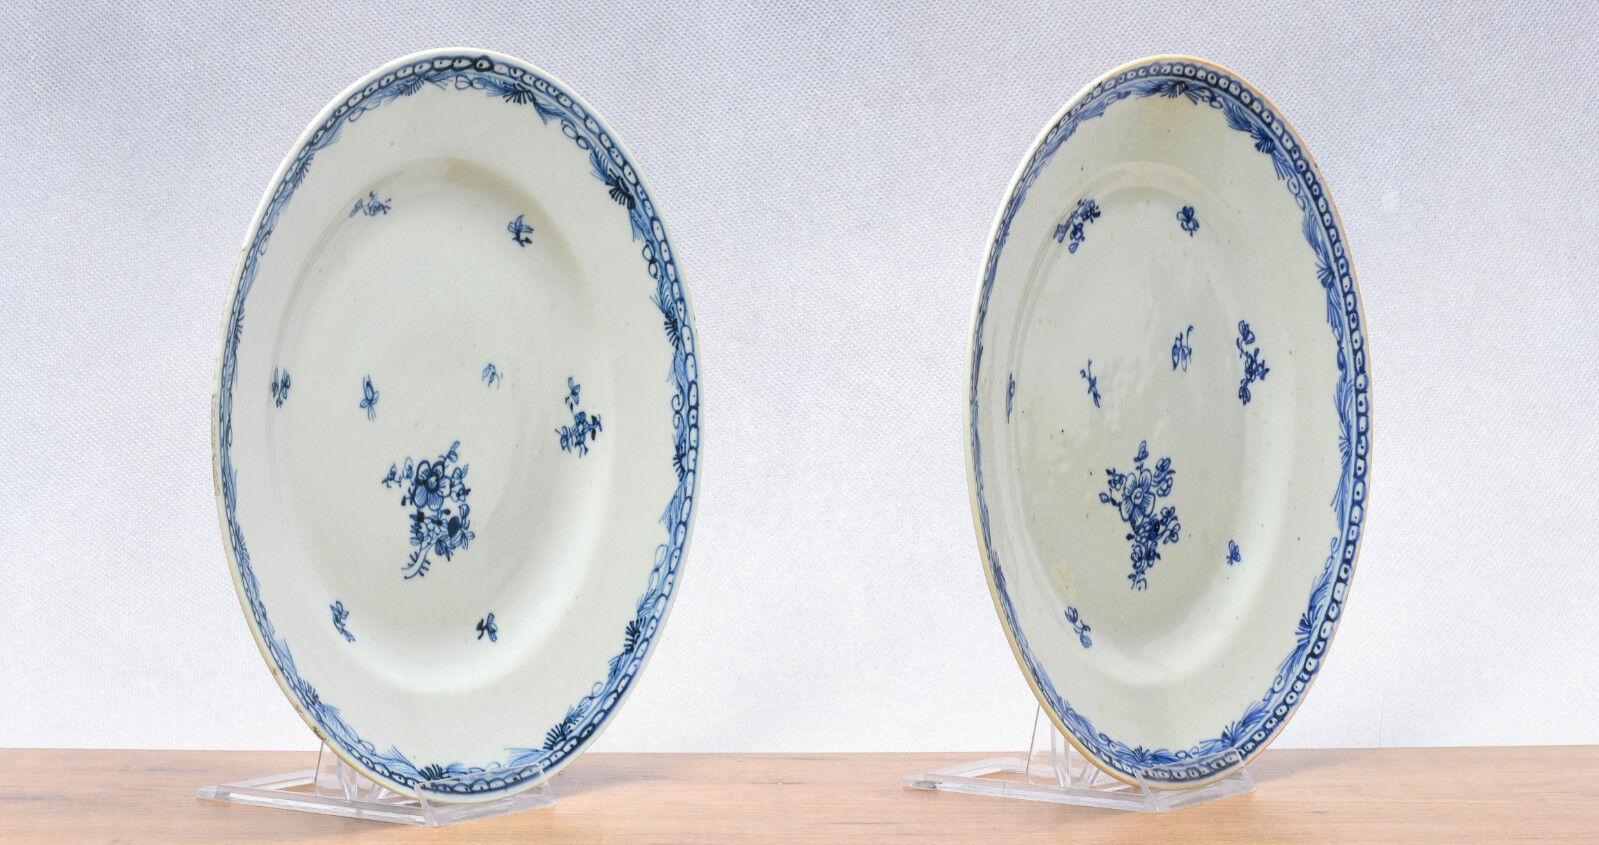 Nicely painted18c plate with flowers.  Paintwork is true craftmanship!

Additional information:
Material: Porcelain & Pottery
Type: Plates
Region of Origin: China
Period: 18th century
Age: Pre-1800
Original/Reproduction: Original
Condition: Good